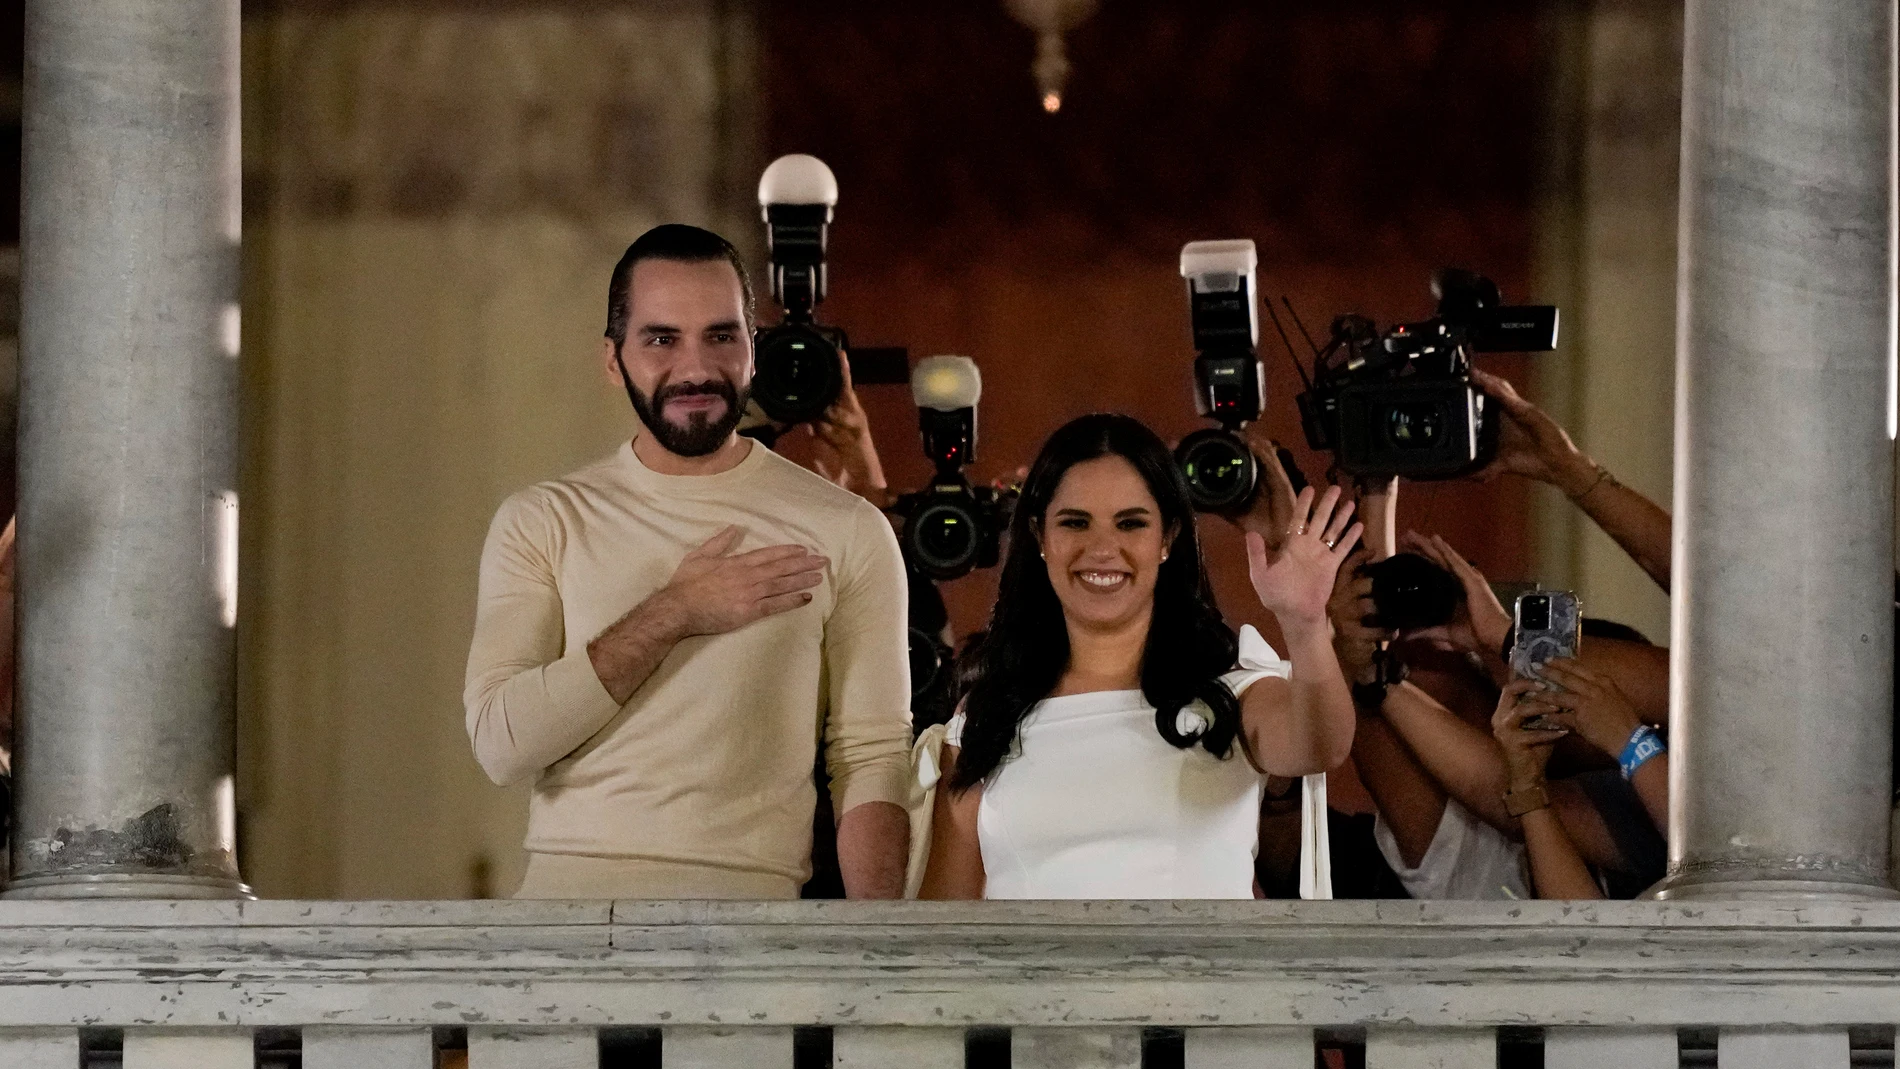 El Salvador President Nayib Bukele, left,accompanied by his wife Gabriela Rodriguez, celebrates after he was re-elected to another five-year five term, at the balcony of the presidential palace in San Salvador, El Salvador, Sunday, Feb. 4, 2024. (AP Photo/Moises Castillo) (AP Photo/Moises Castillo)